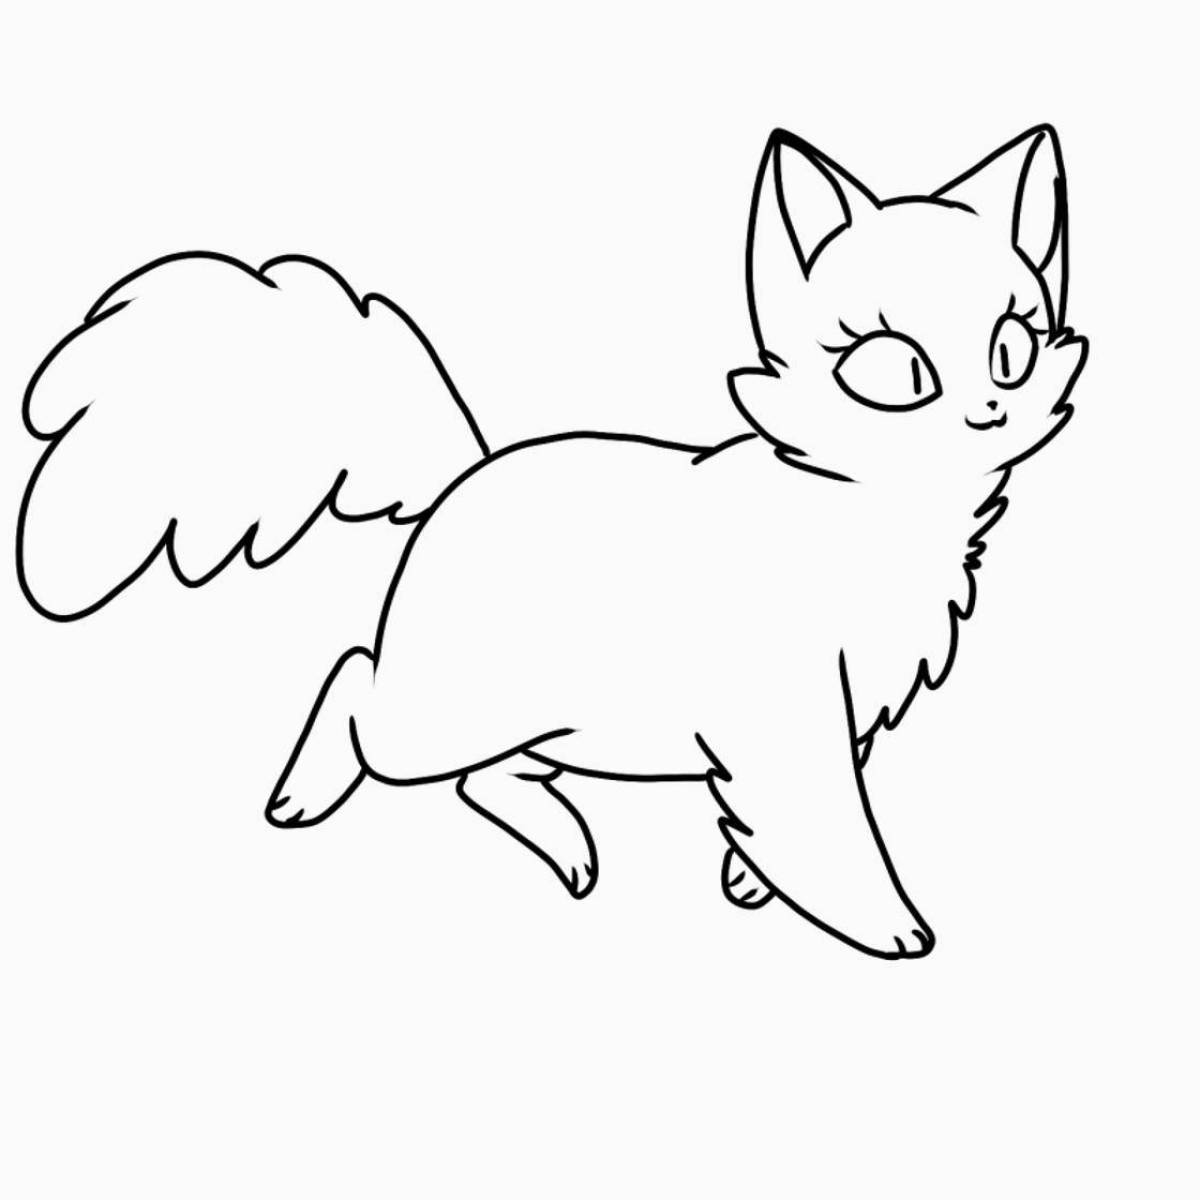 Exquisite angel cat coloring page